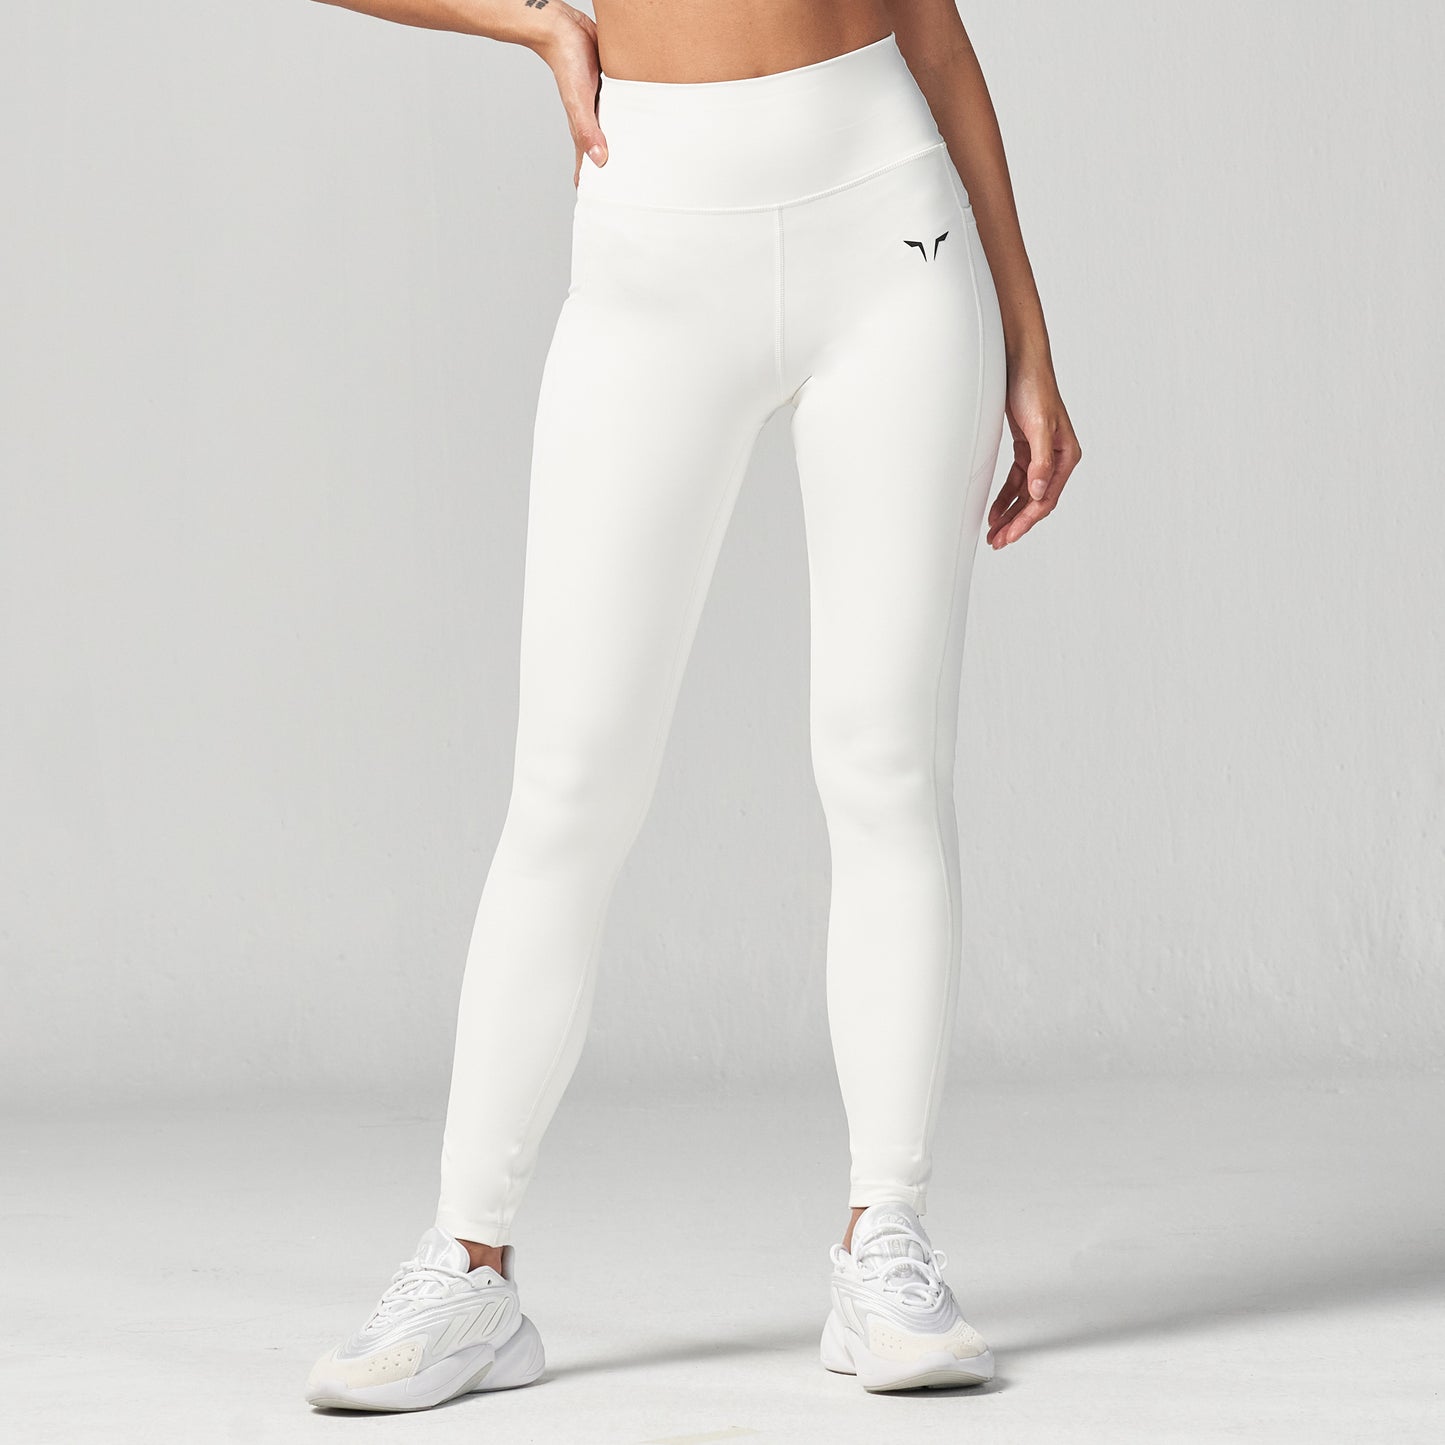 Athletic Girl Working Out Gym Fitness Woman White Leggings Stock Photo by  ©Nikolas_jkd 415694912